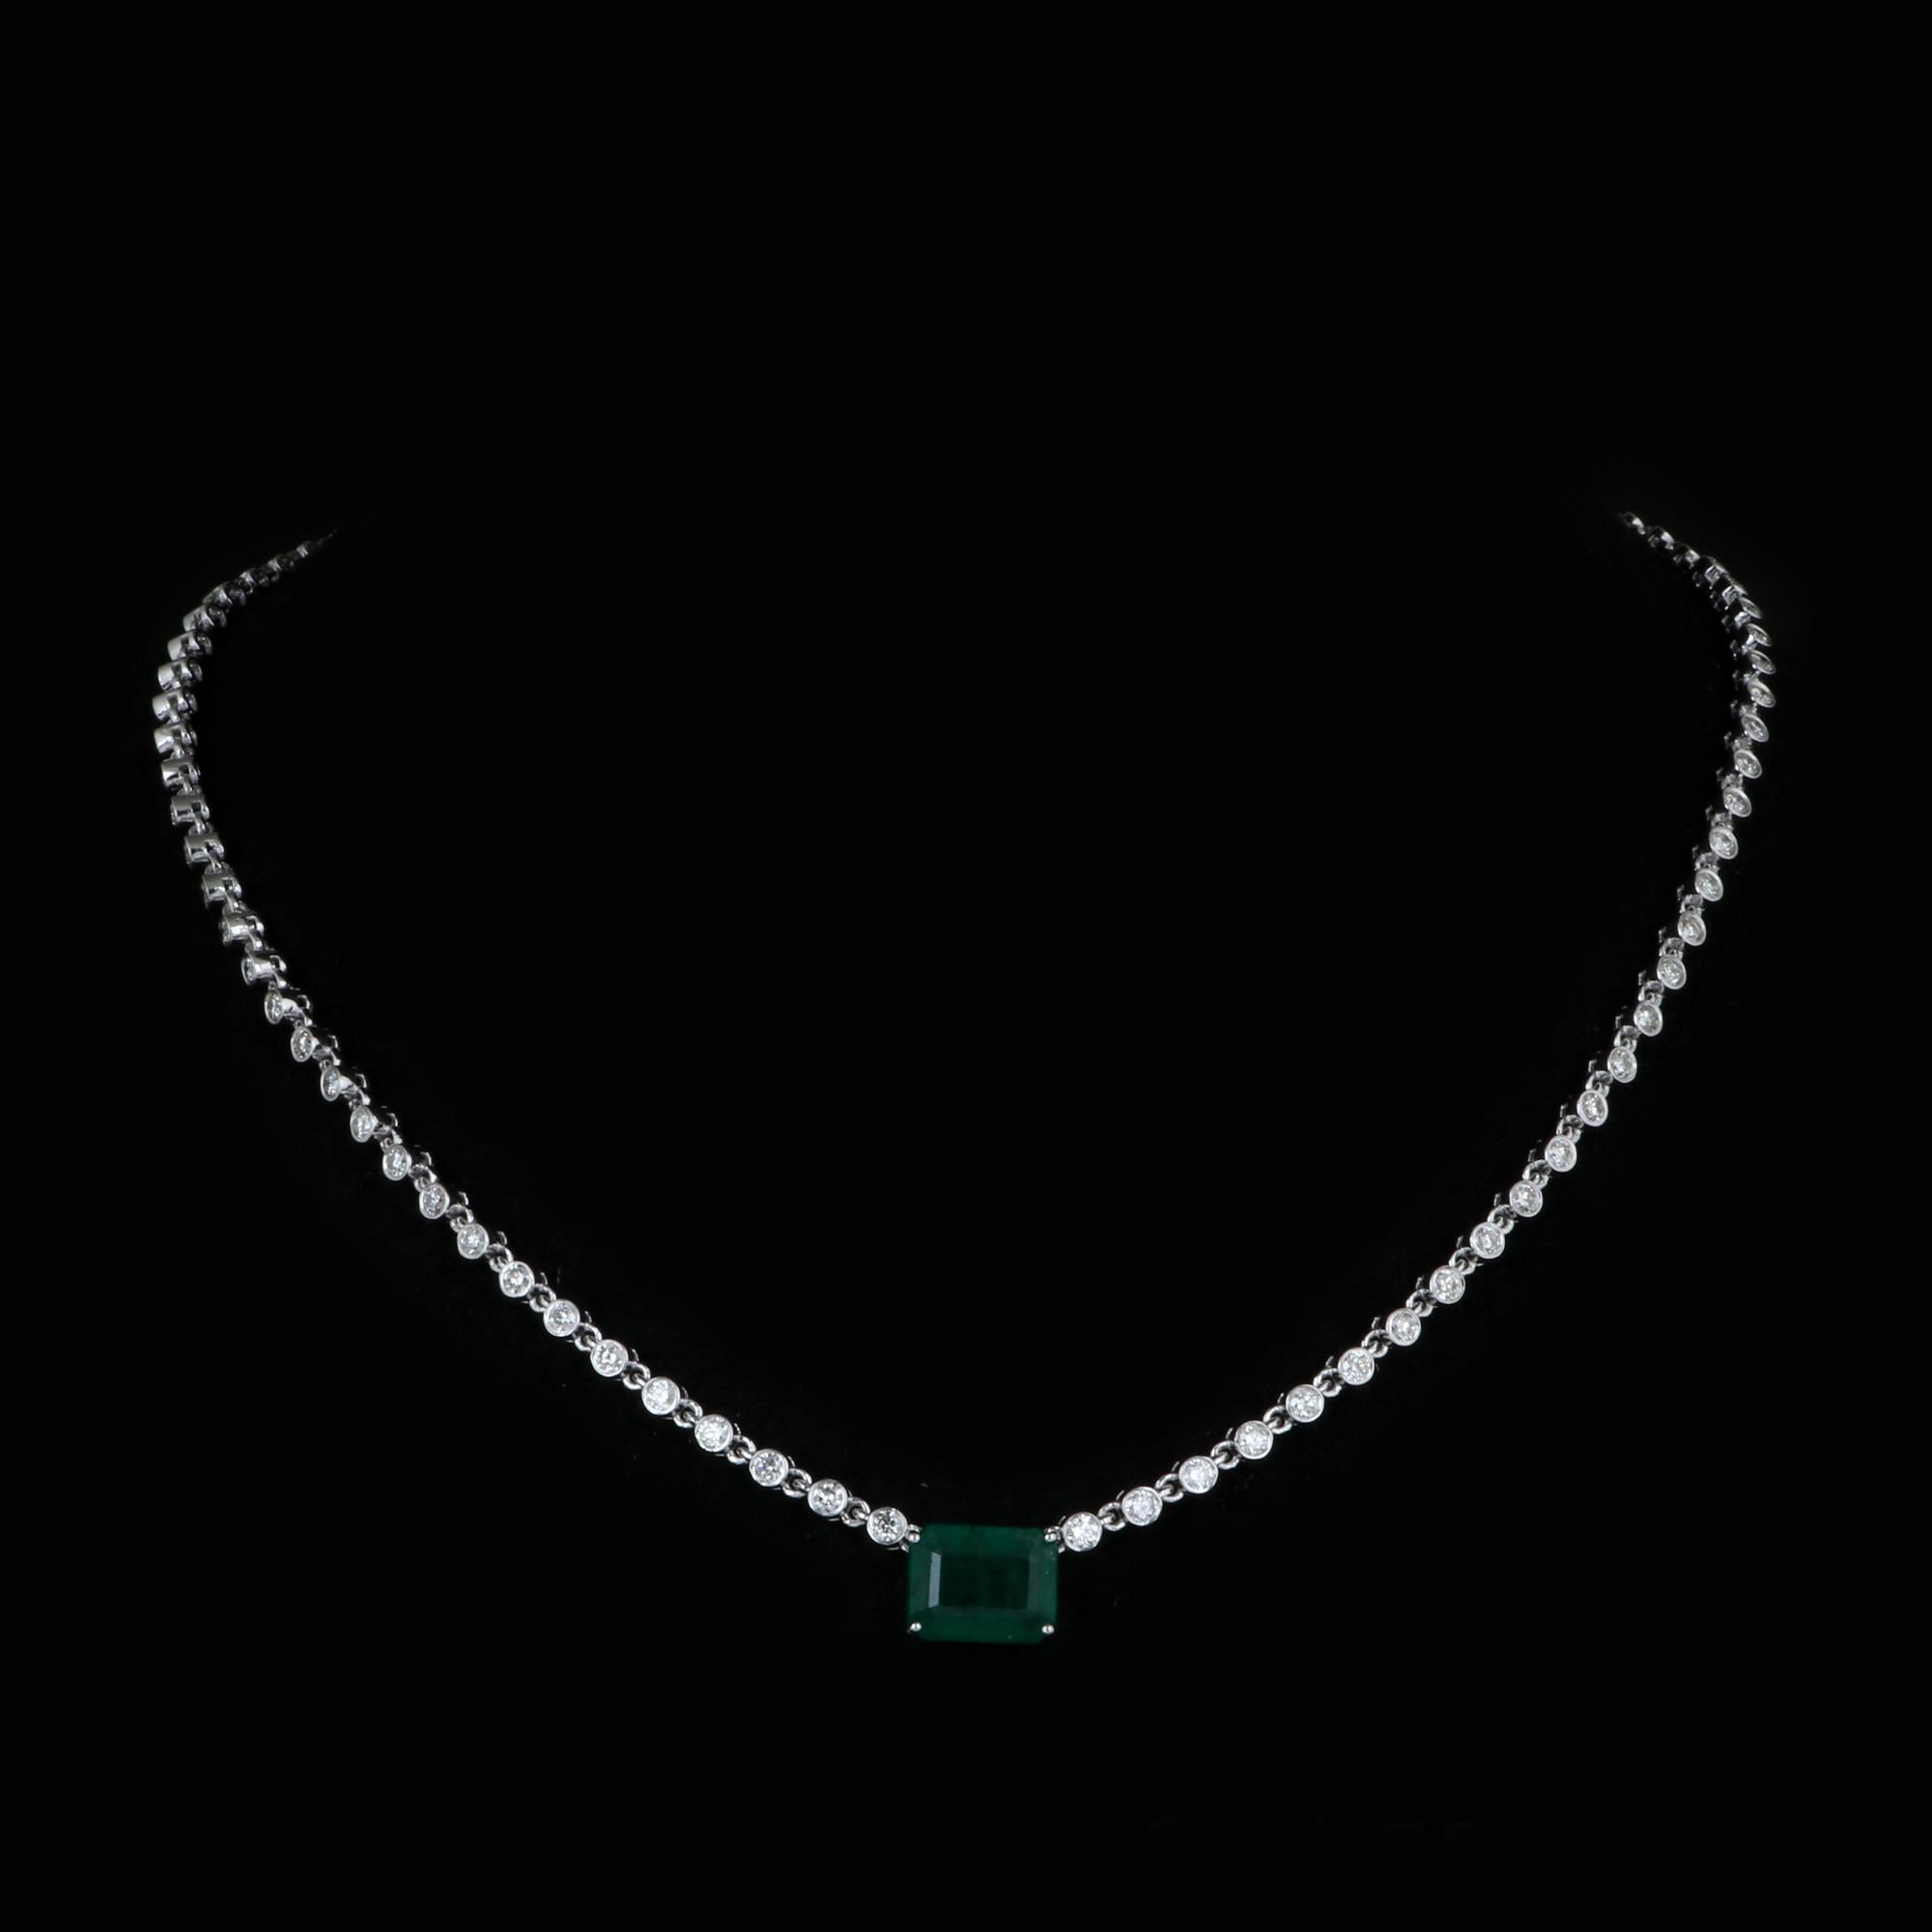 Women's Natural Emerald Diamond Charm Necklace 18k White Gold Handmade Fine Jewelry For Sale